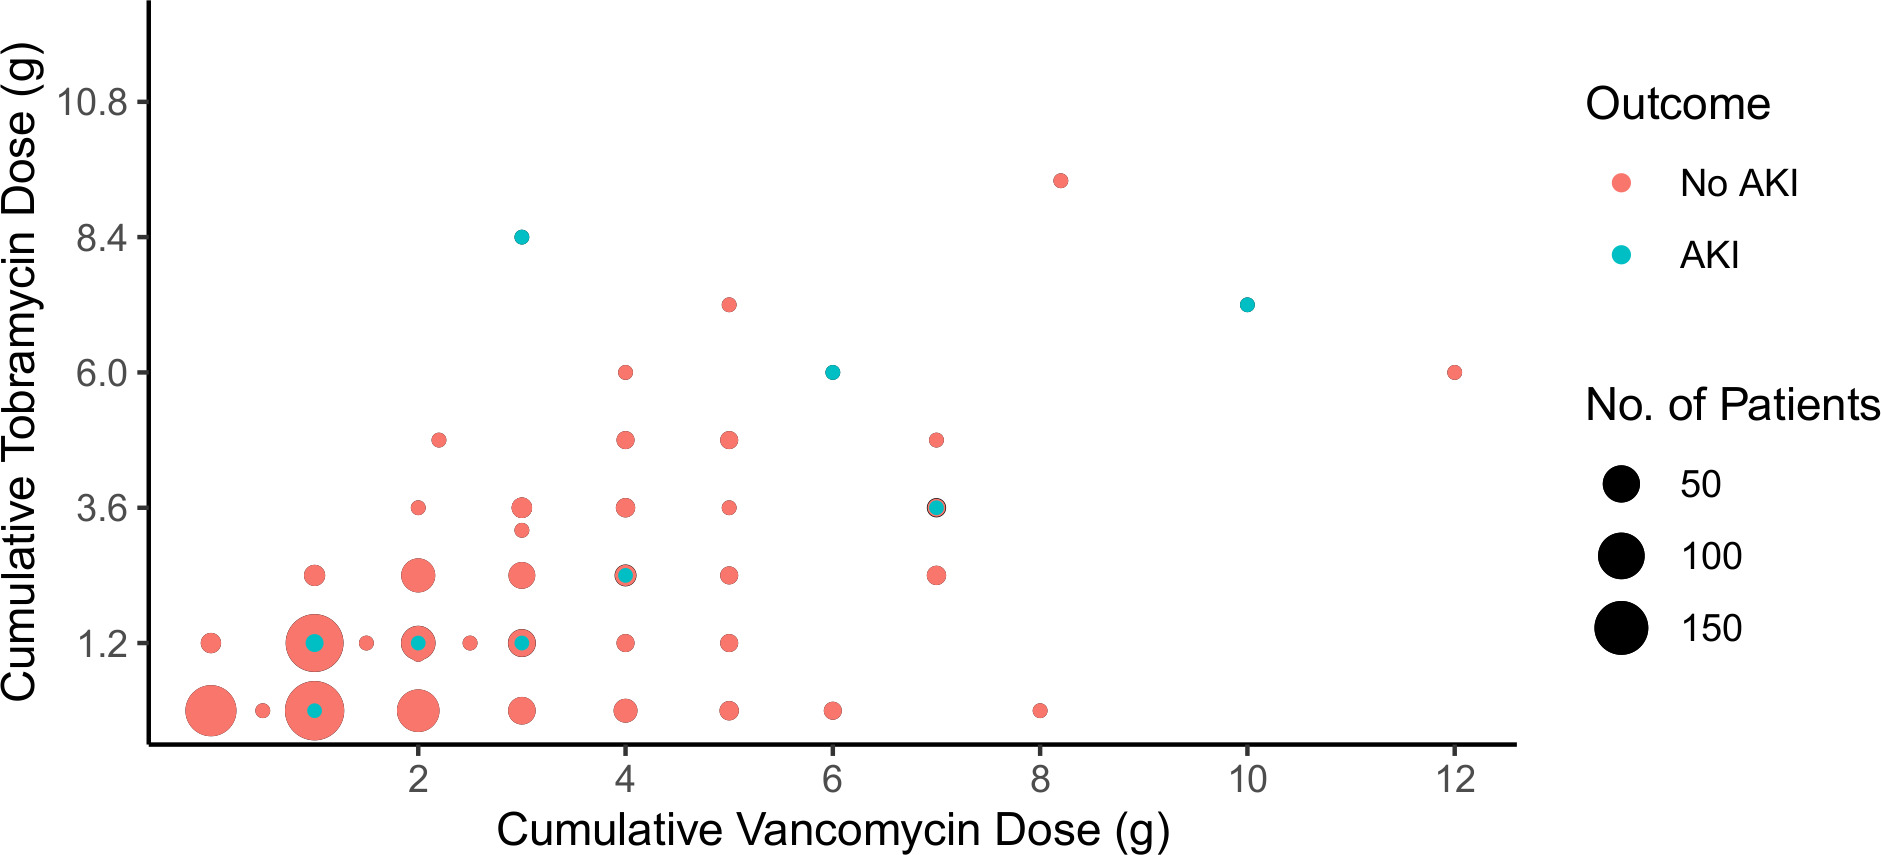 Fig. 1 
          Distribution of the intrawound vancomycin powder and intrawound tobramycin powder cumulative doses. The dot size is proportional to the number of patients it represents. Drug-induced acute kidney injury (AKI) is indicated by the green dots.
        